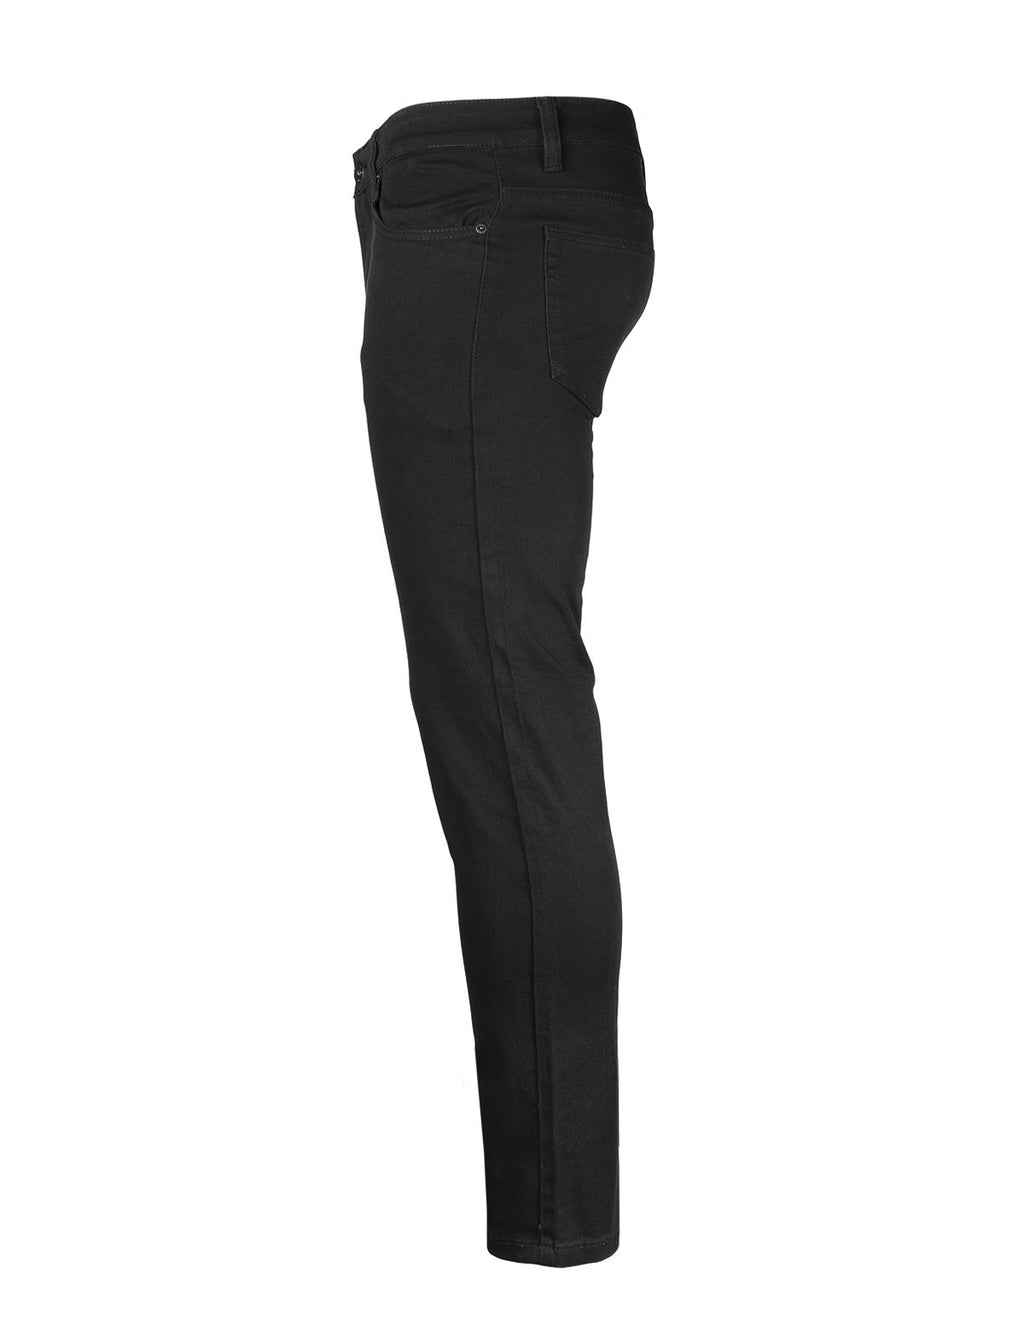 Victorious by ZIMEGO - Mens Skinny Fit Stretch Twill Pants - BLACK